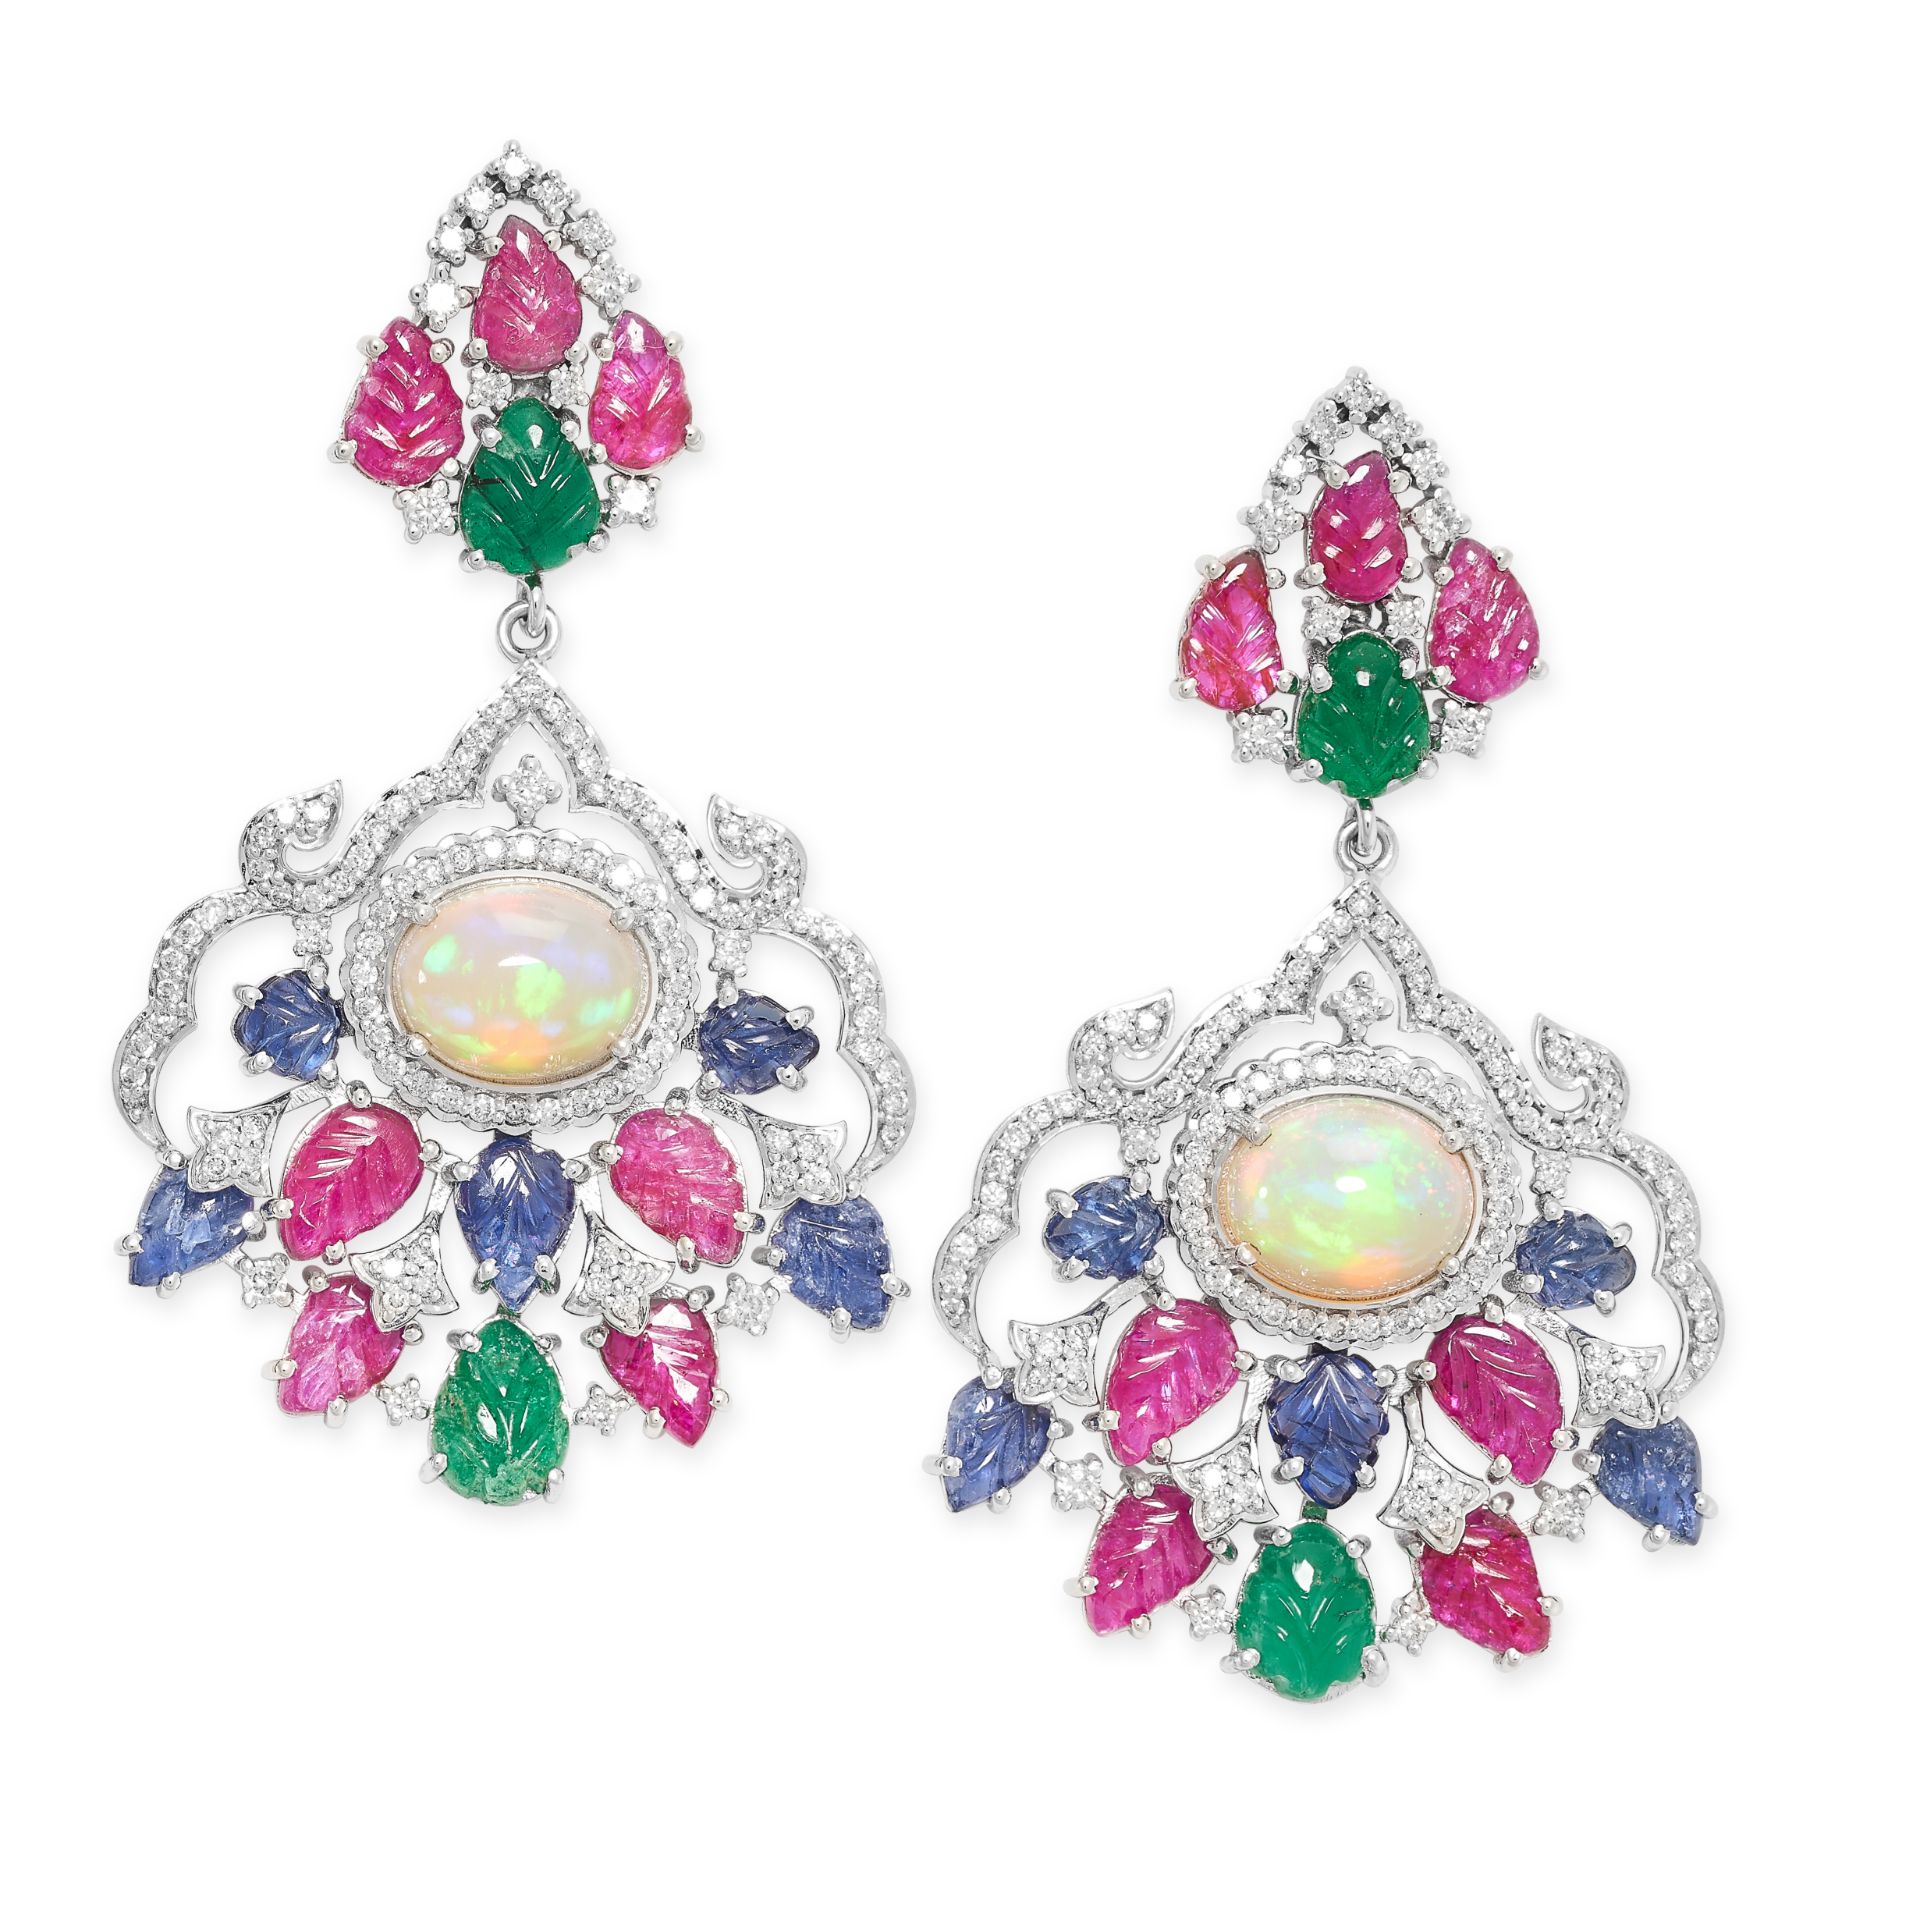 A PAIR OF GEMSET AND DIAMOND EARRINGS the drop comprising a cabochon opal, carved emerald, carved